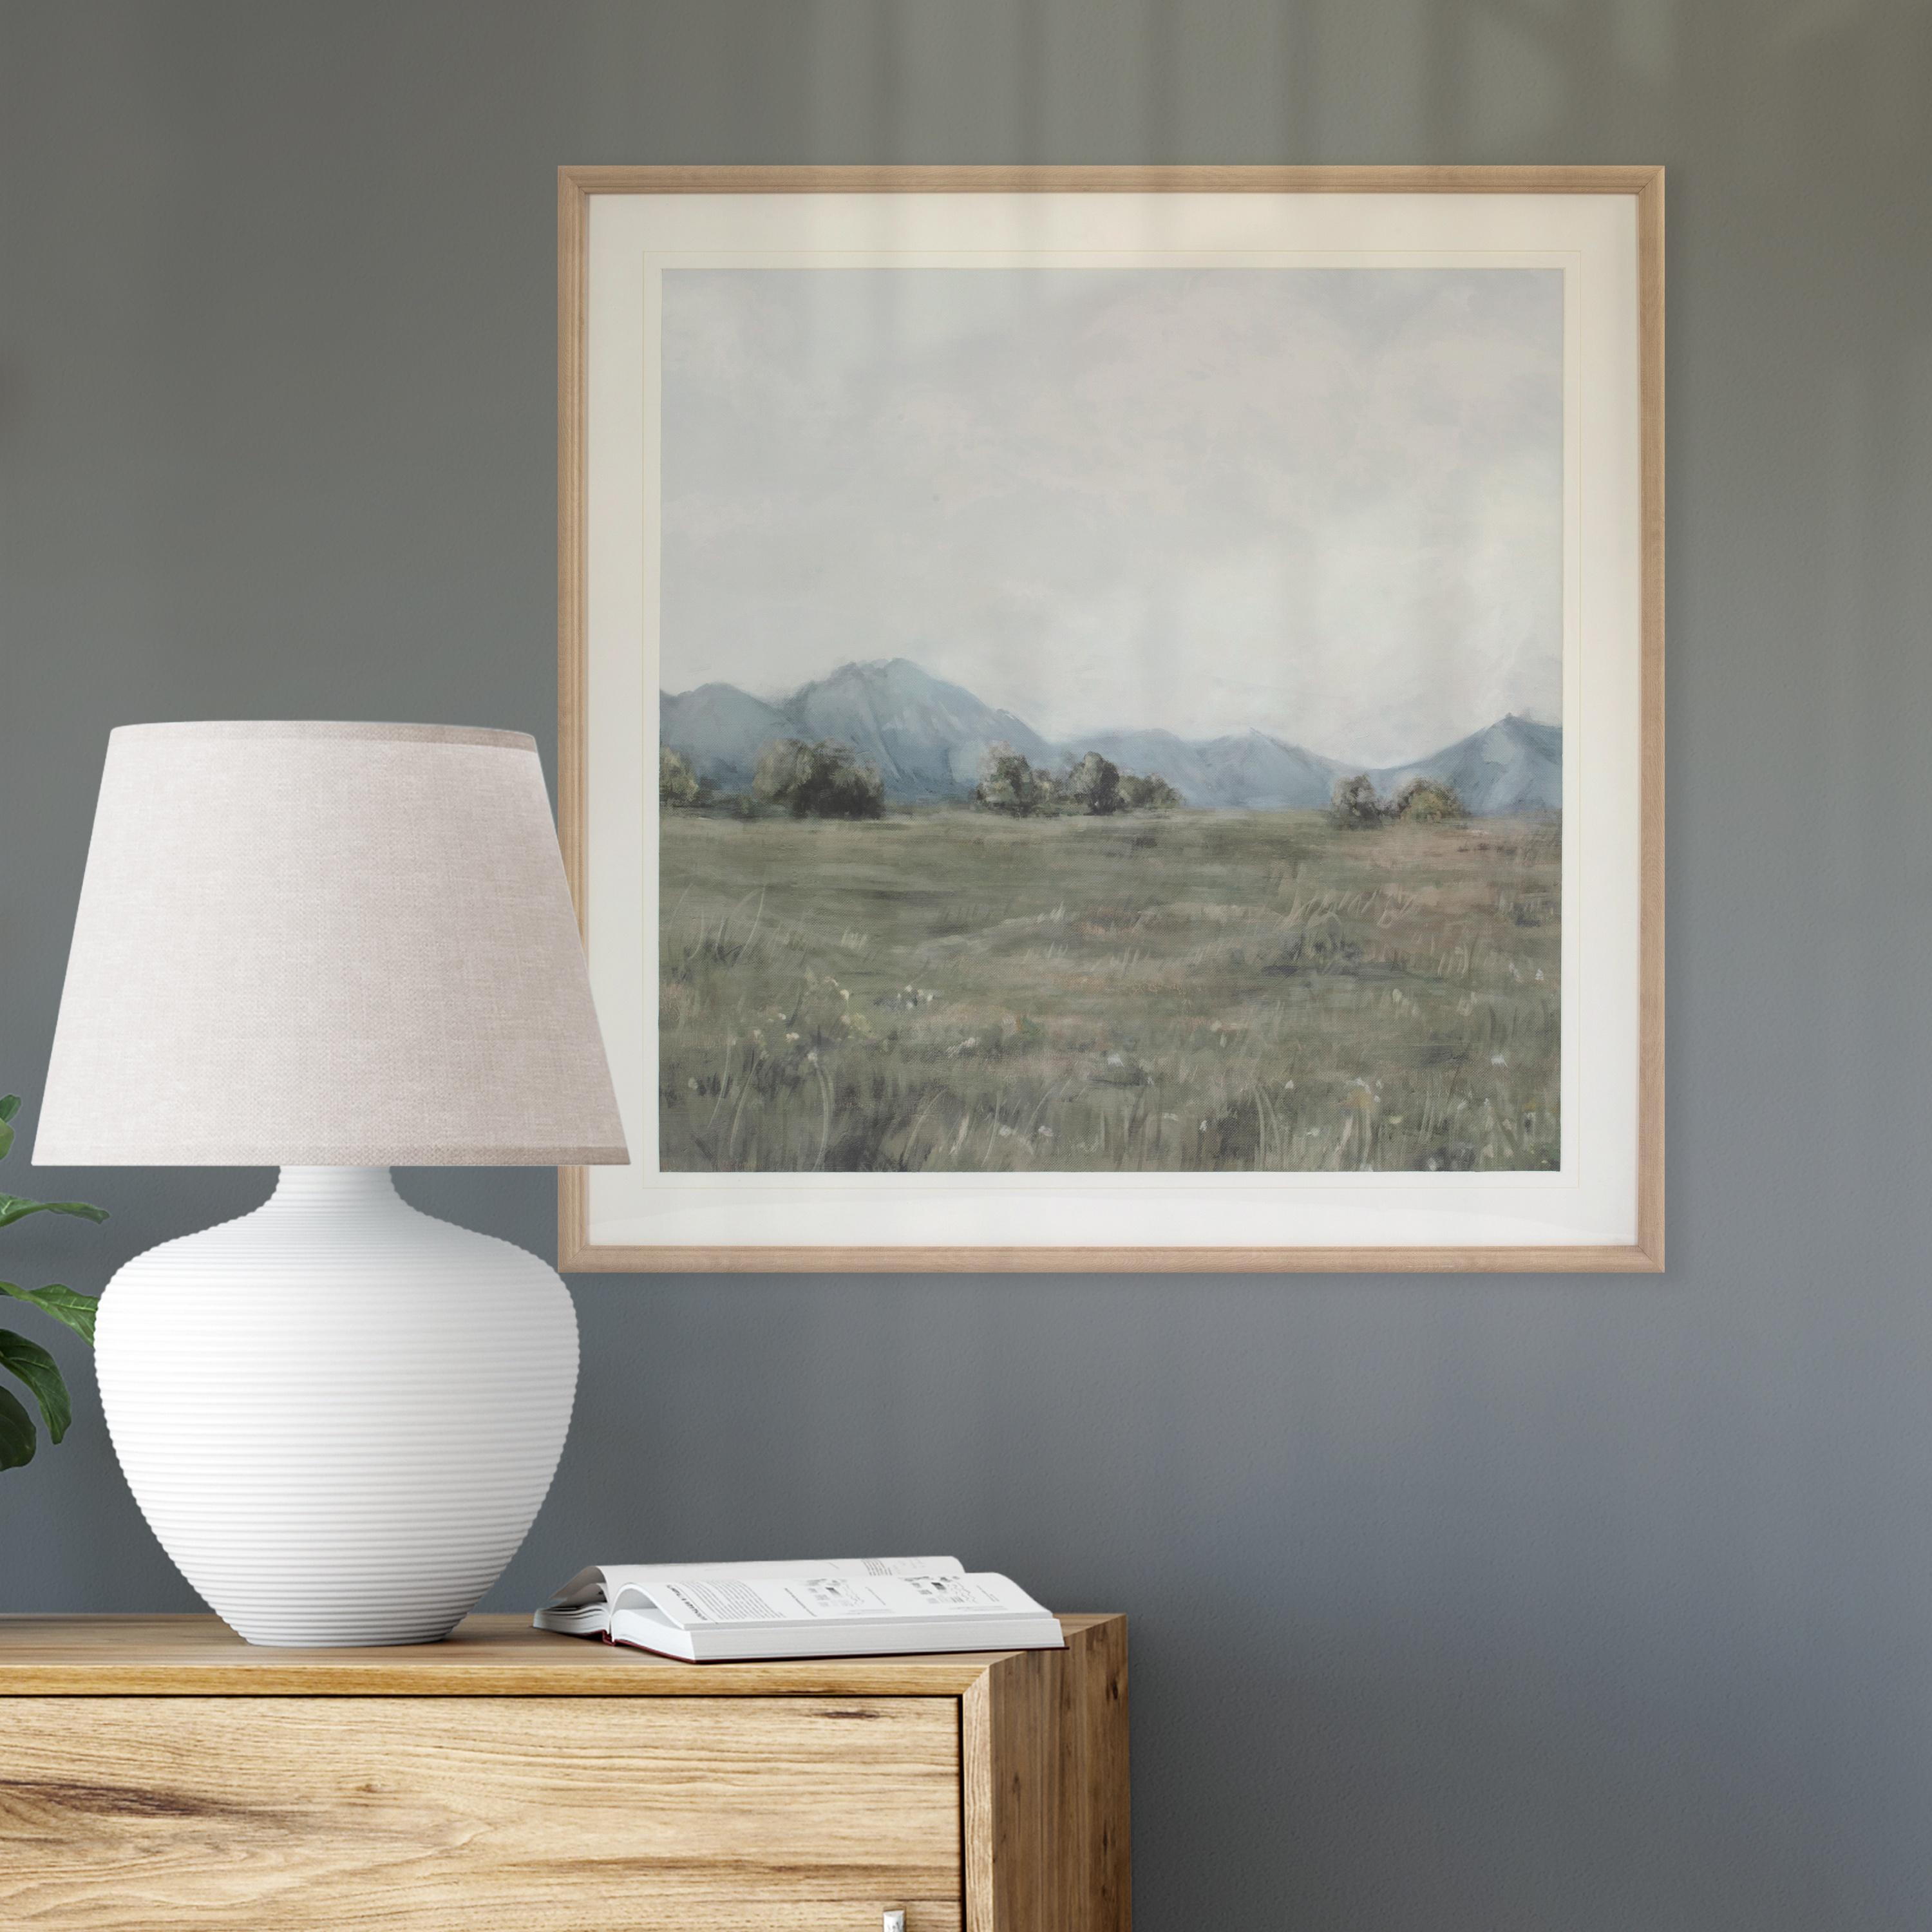 My Texas House Meadow Day Landscape Framed Under Glass Art 30" x 30" - image 5 of 5